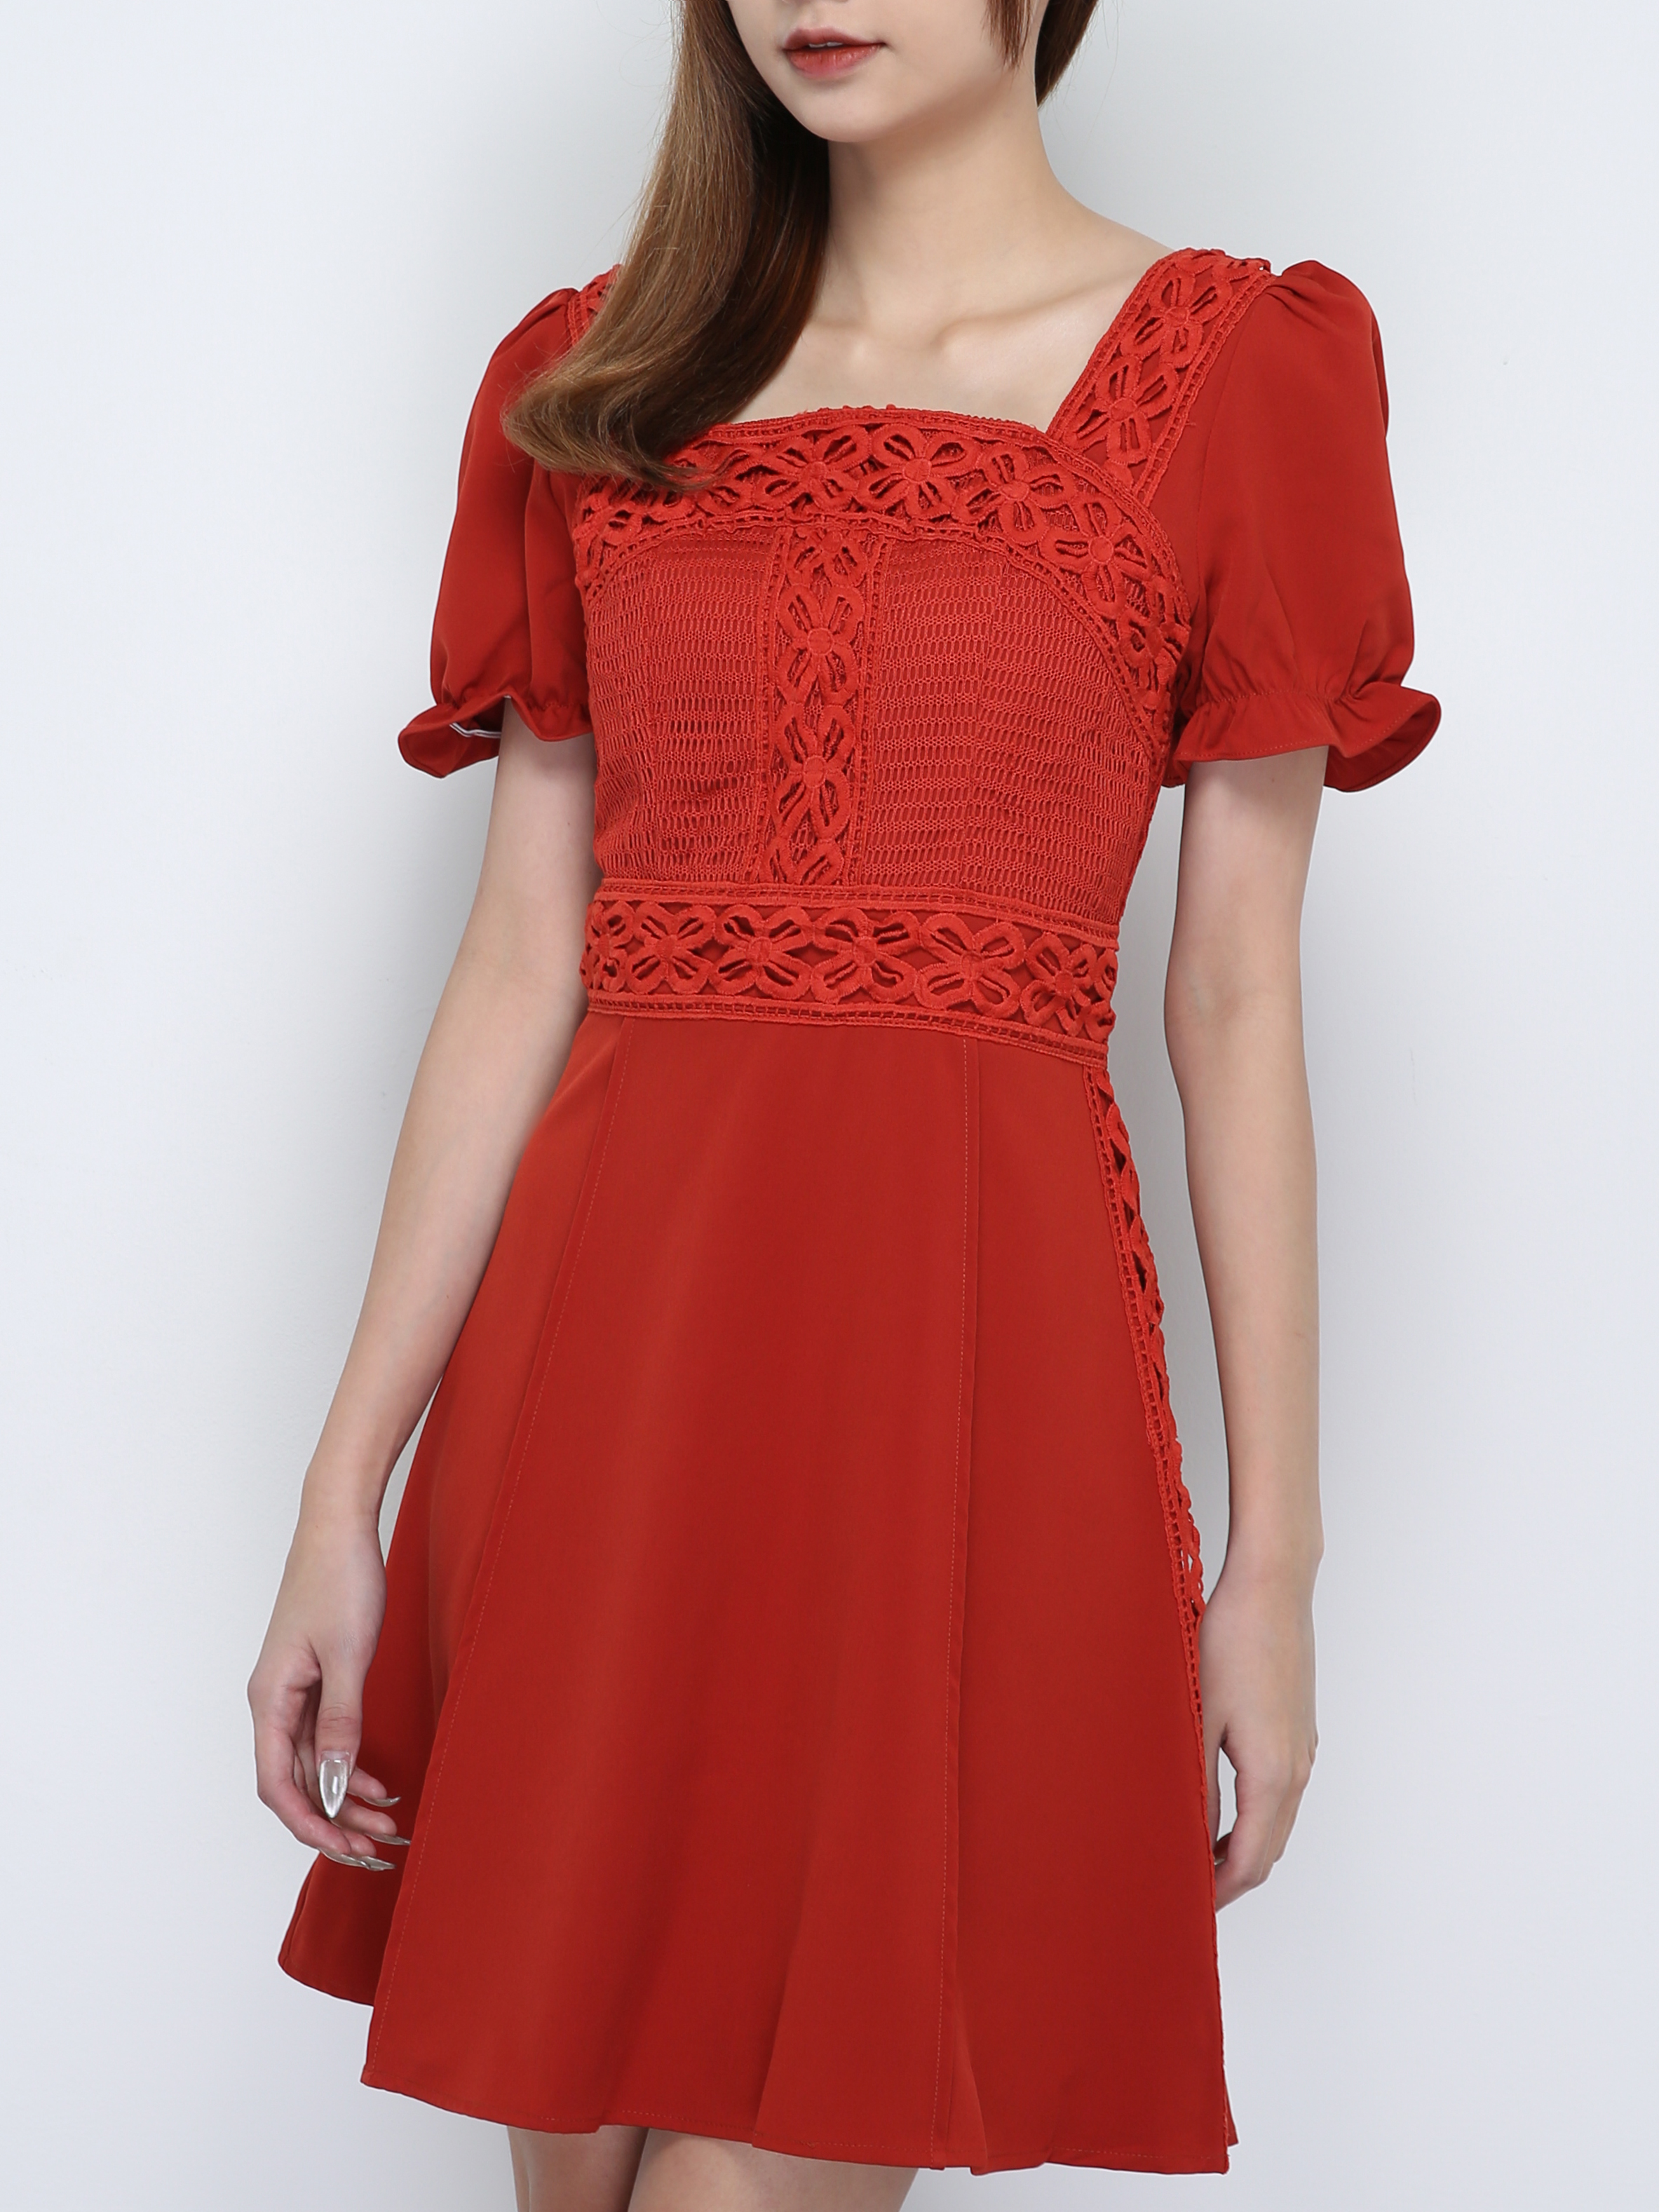 Detailed Lace Dress 18562